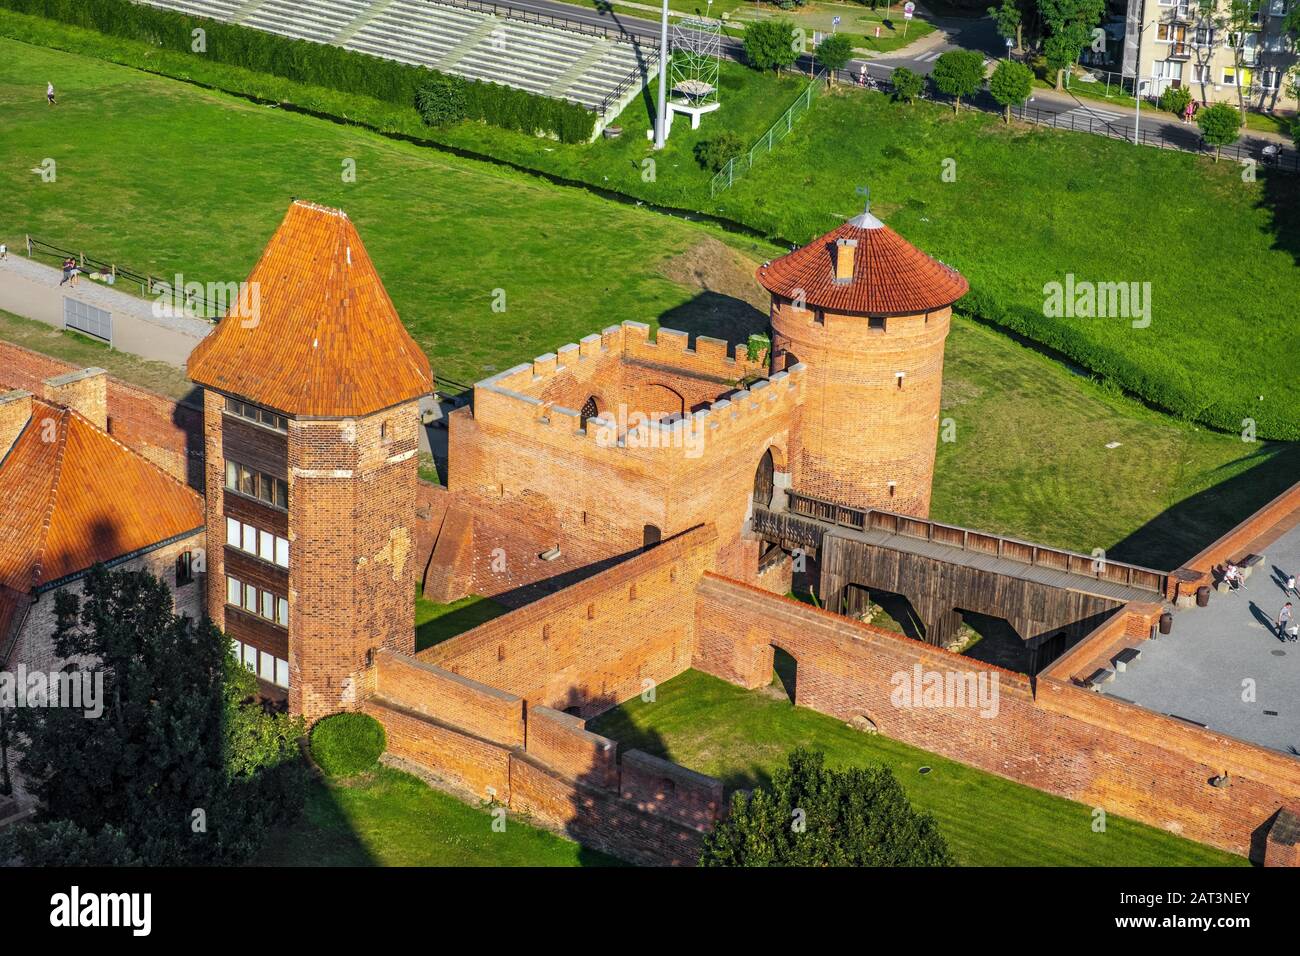 Malbork, Pomerania / Poland - 2019/08/24: Aerial panoramic view of the external defense walls, towers moat and keeps of the medieval Teutonic Order Castle in Malbork, Poland Stock Photo